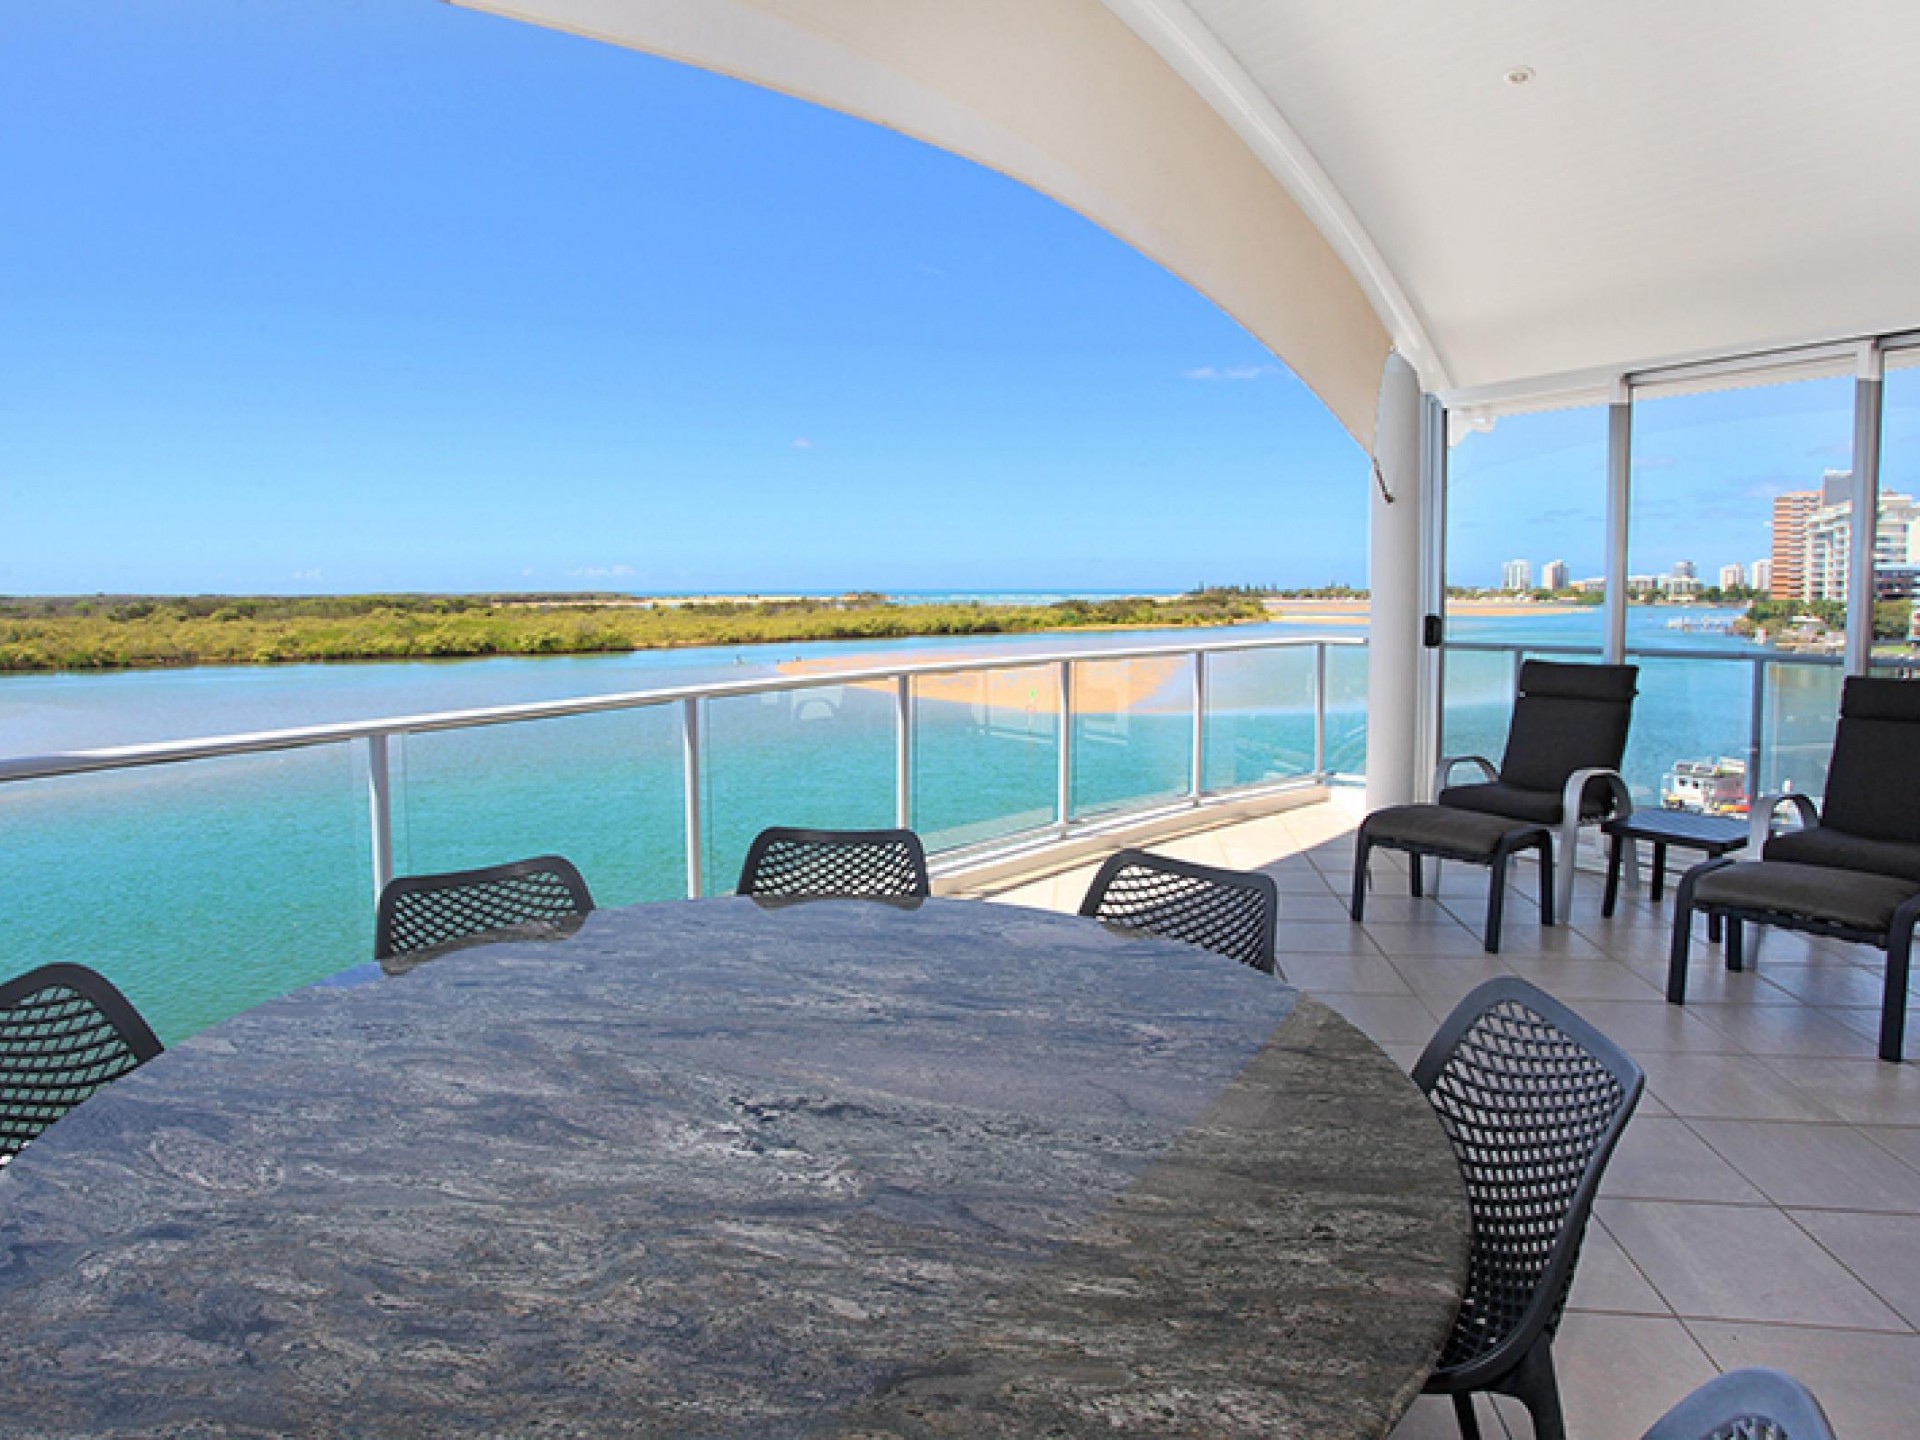 ABSOLUTE WATERFRONT PENTHOUSE WITH AMAZING RIVER/OCEAN VIEWS!